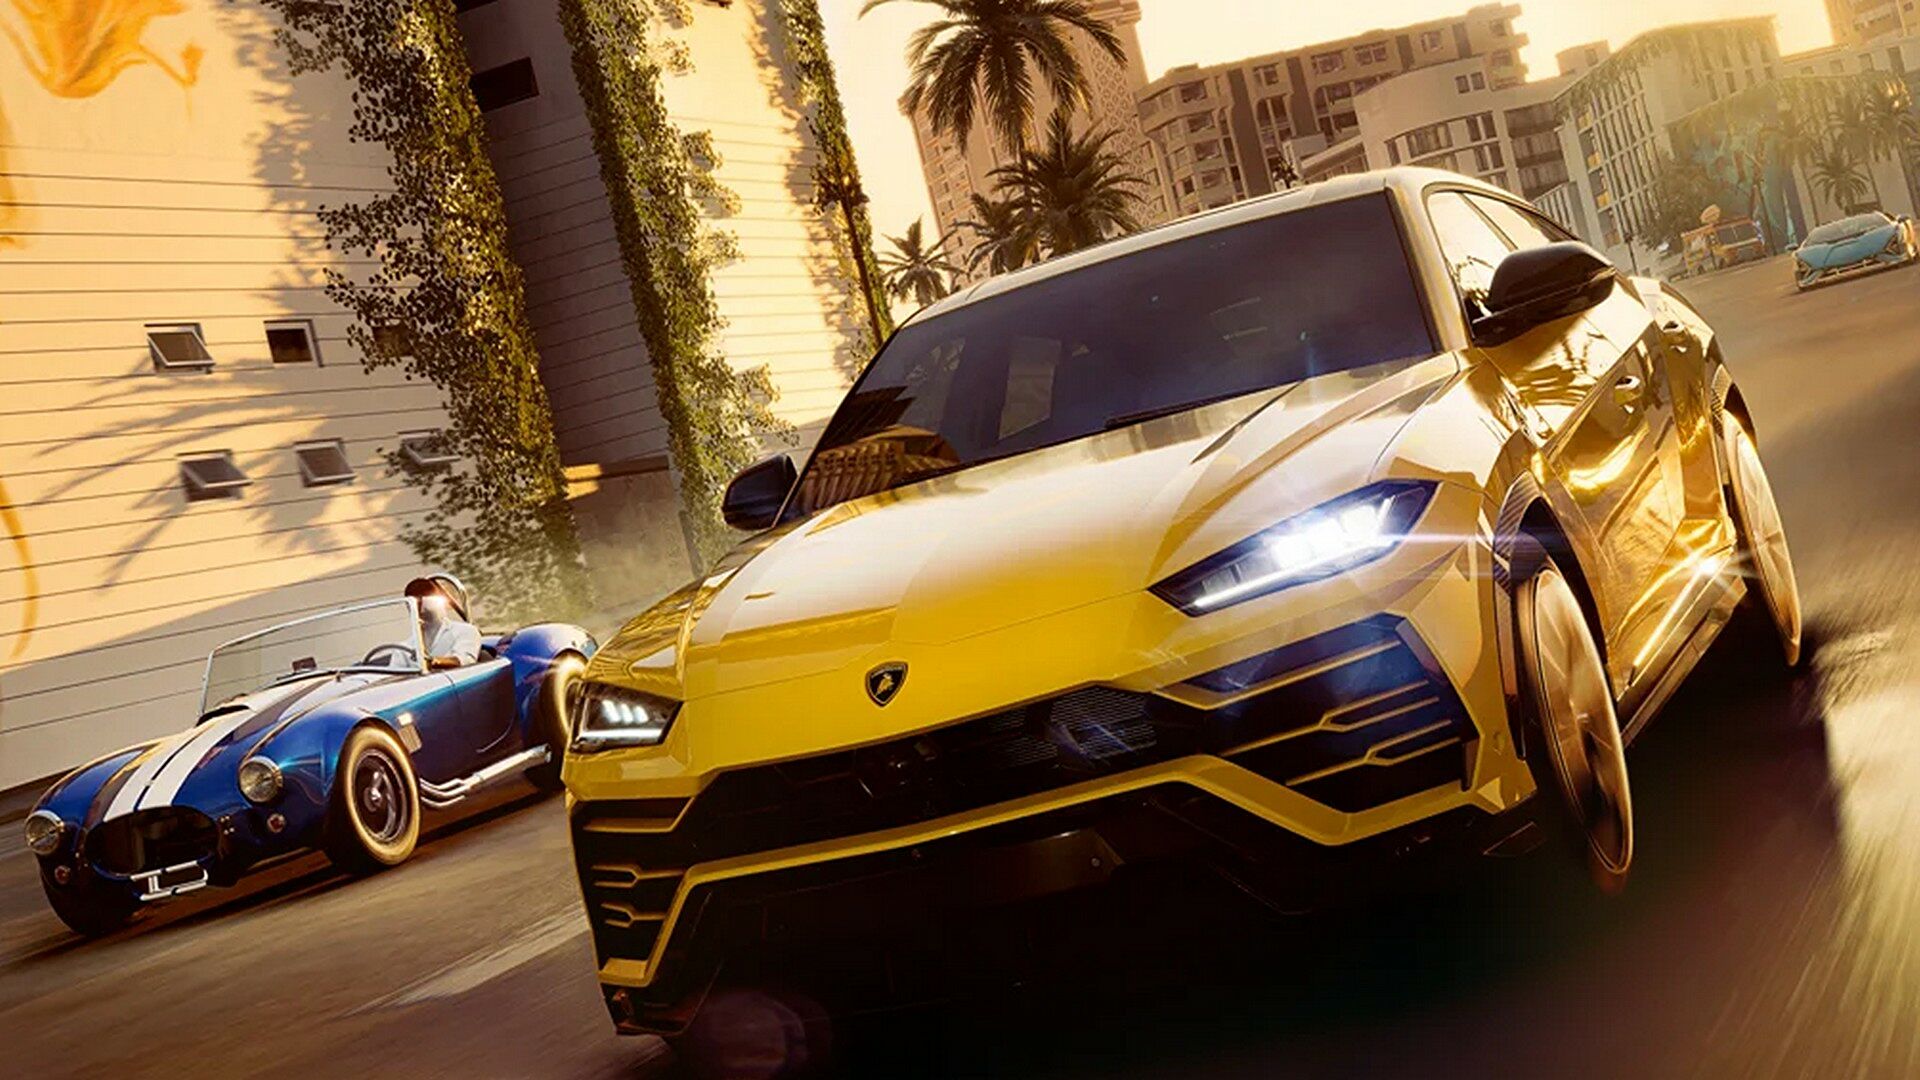 The Crew Motorfest announced: New action racing game coming in 2023